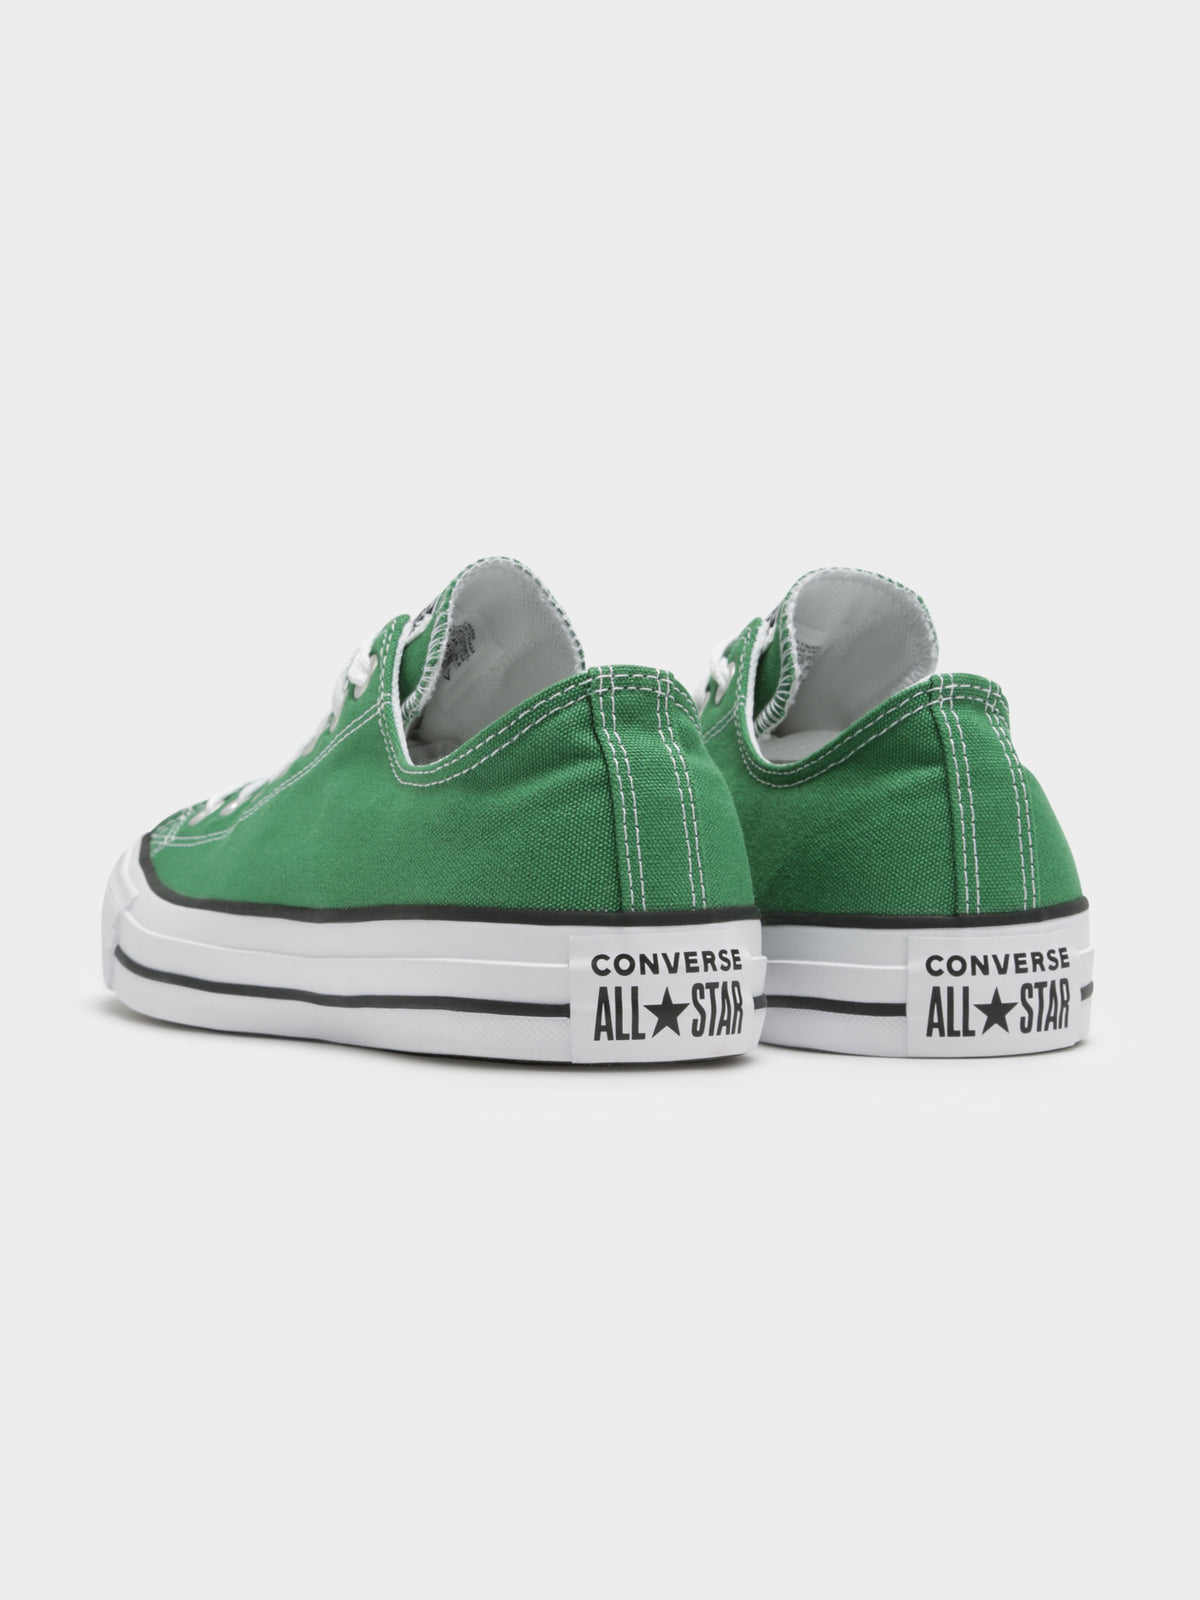 Unisex Chuck Taylor All Star Low Sneakers in Amazon Green